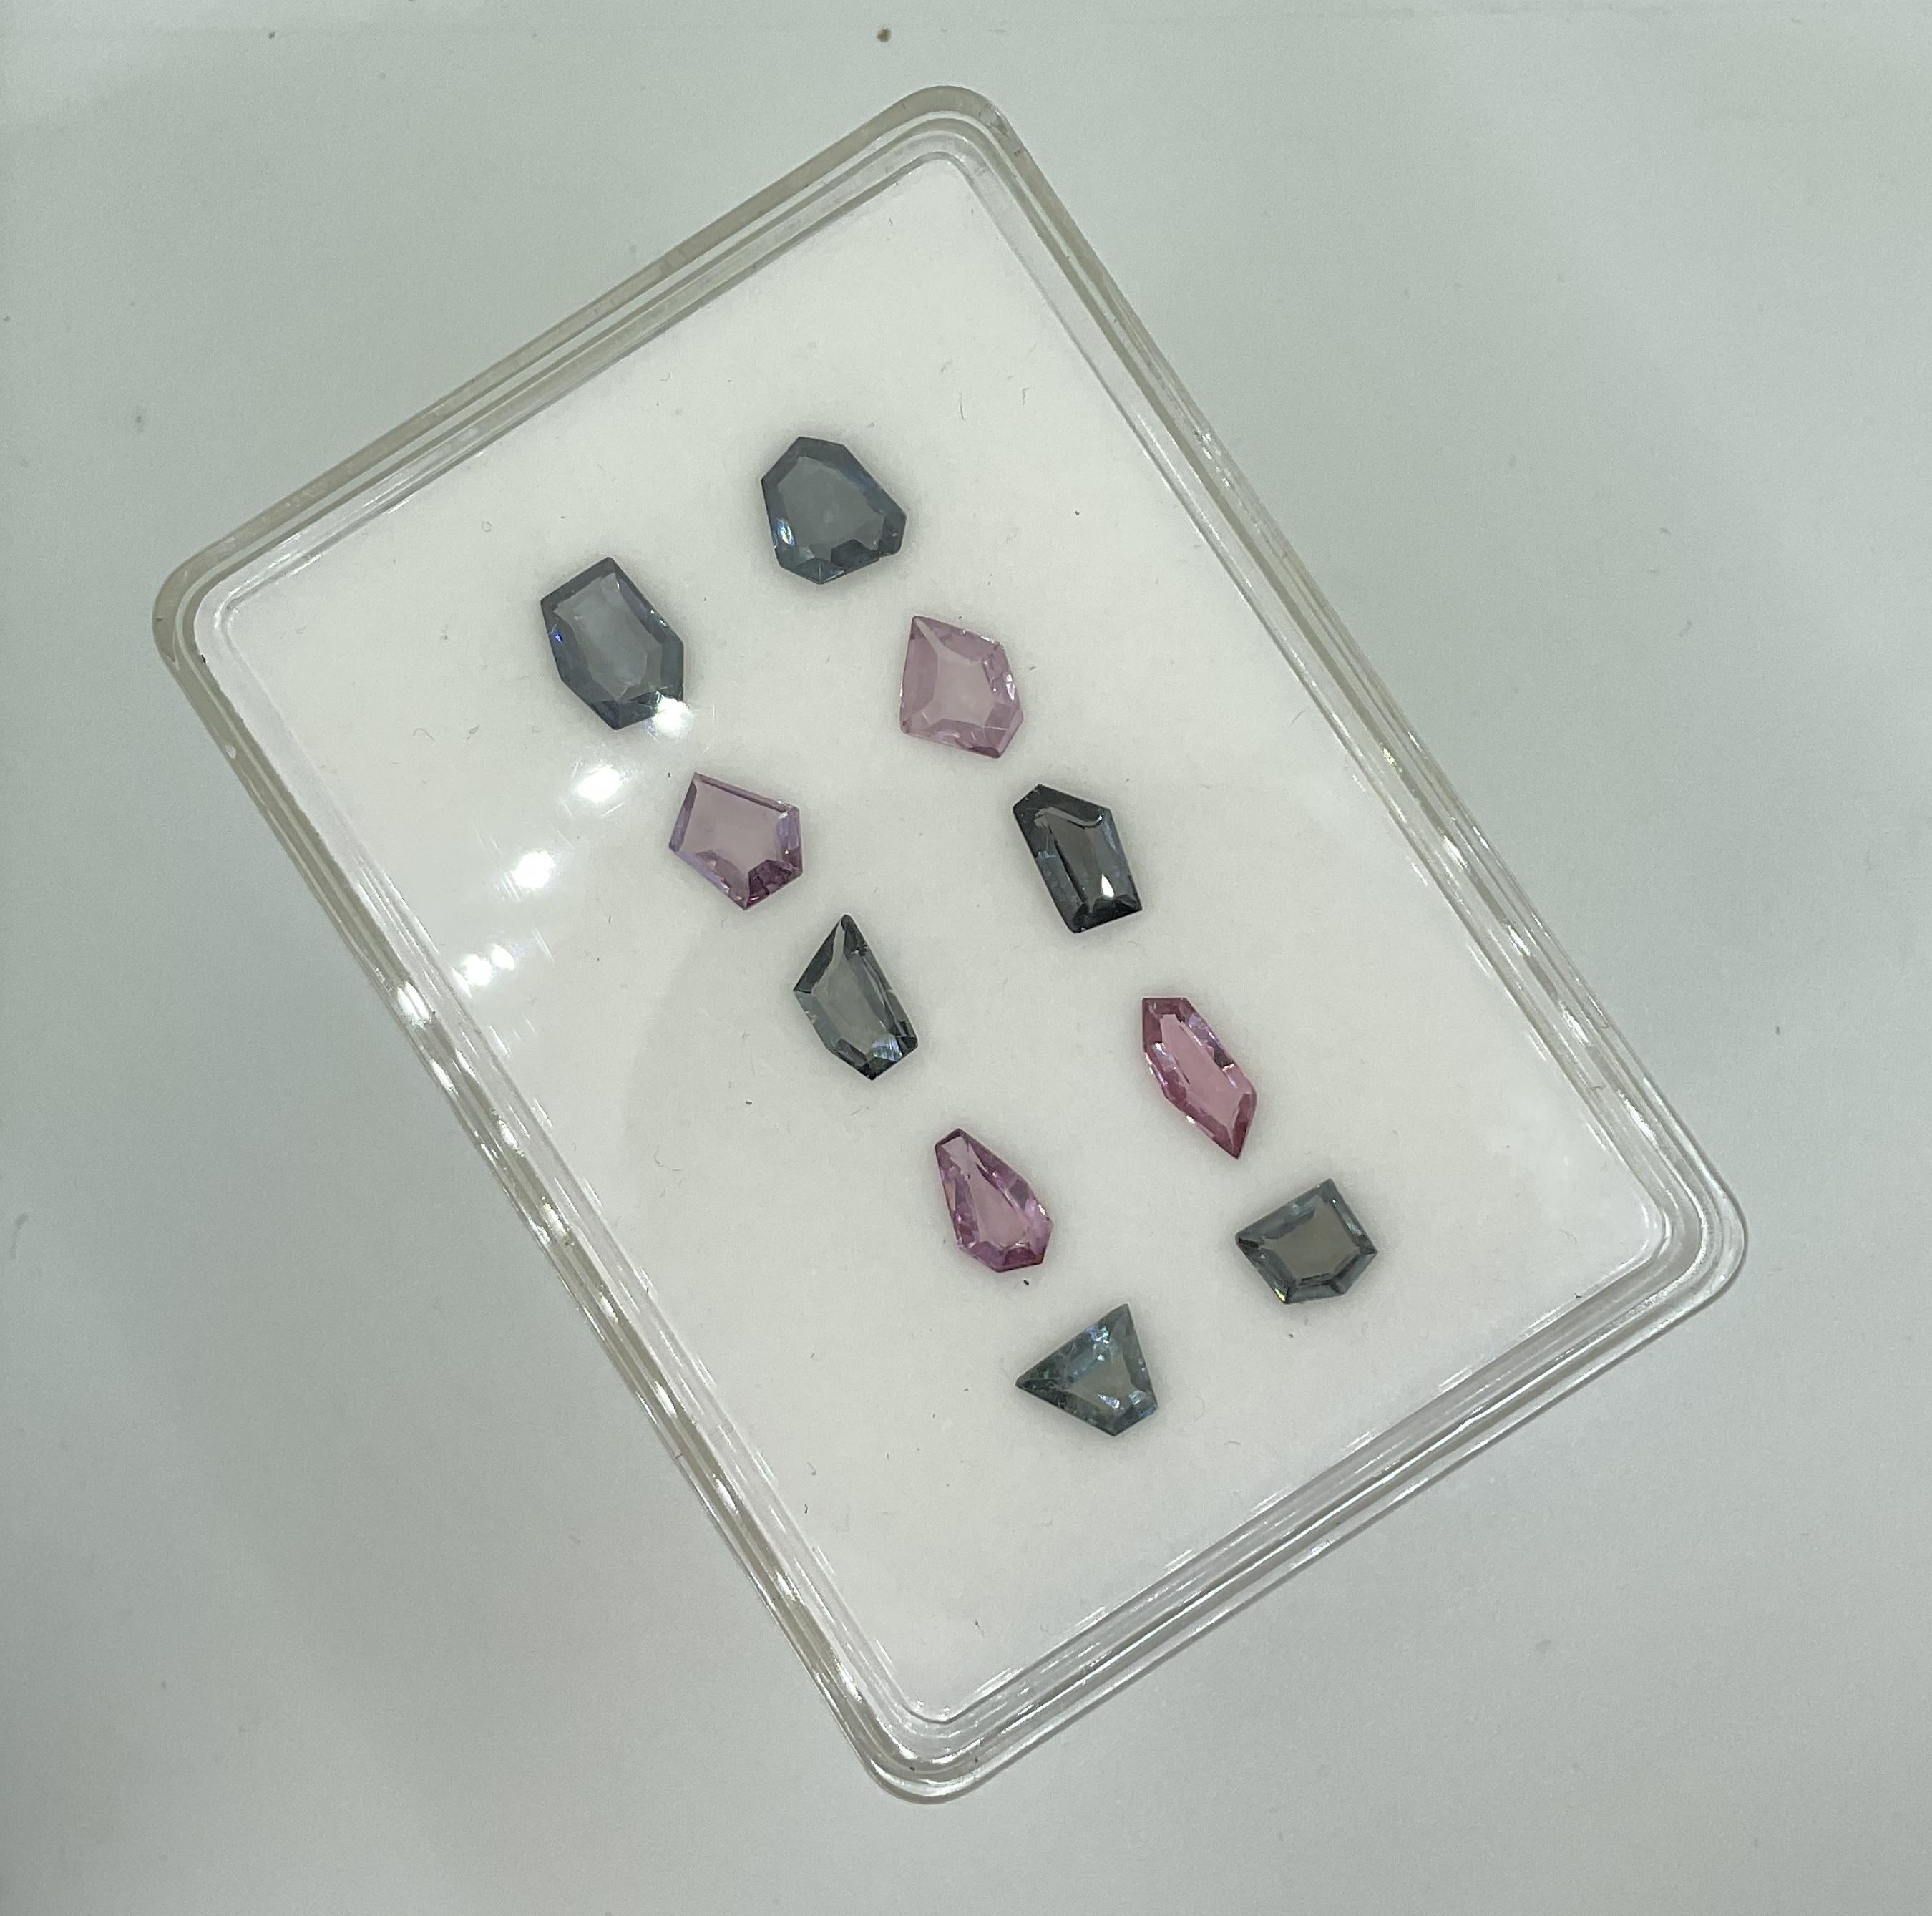 12.35 Carats Grey & Pink Spinel Fancy Cut Stone Natural Gem For Top Fine Jewelry For Sale 1